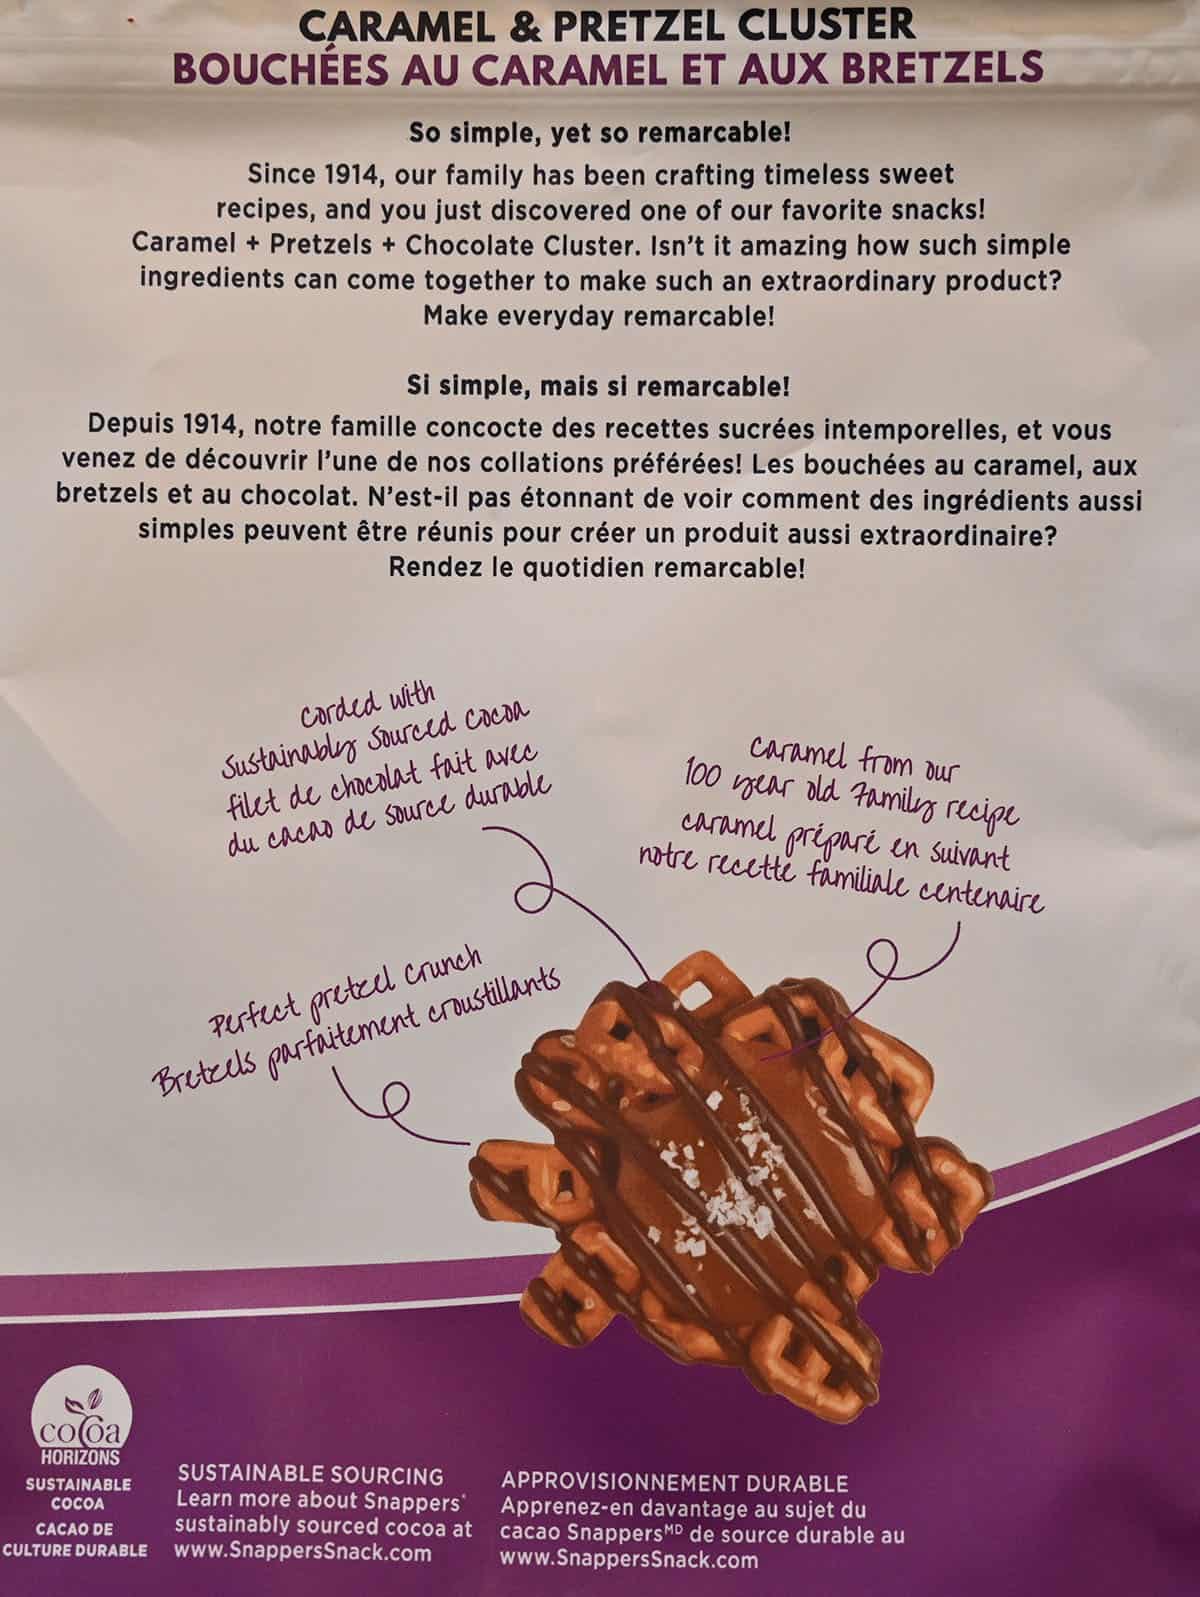 Image of the Snappers company and product description from the bag.